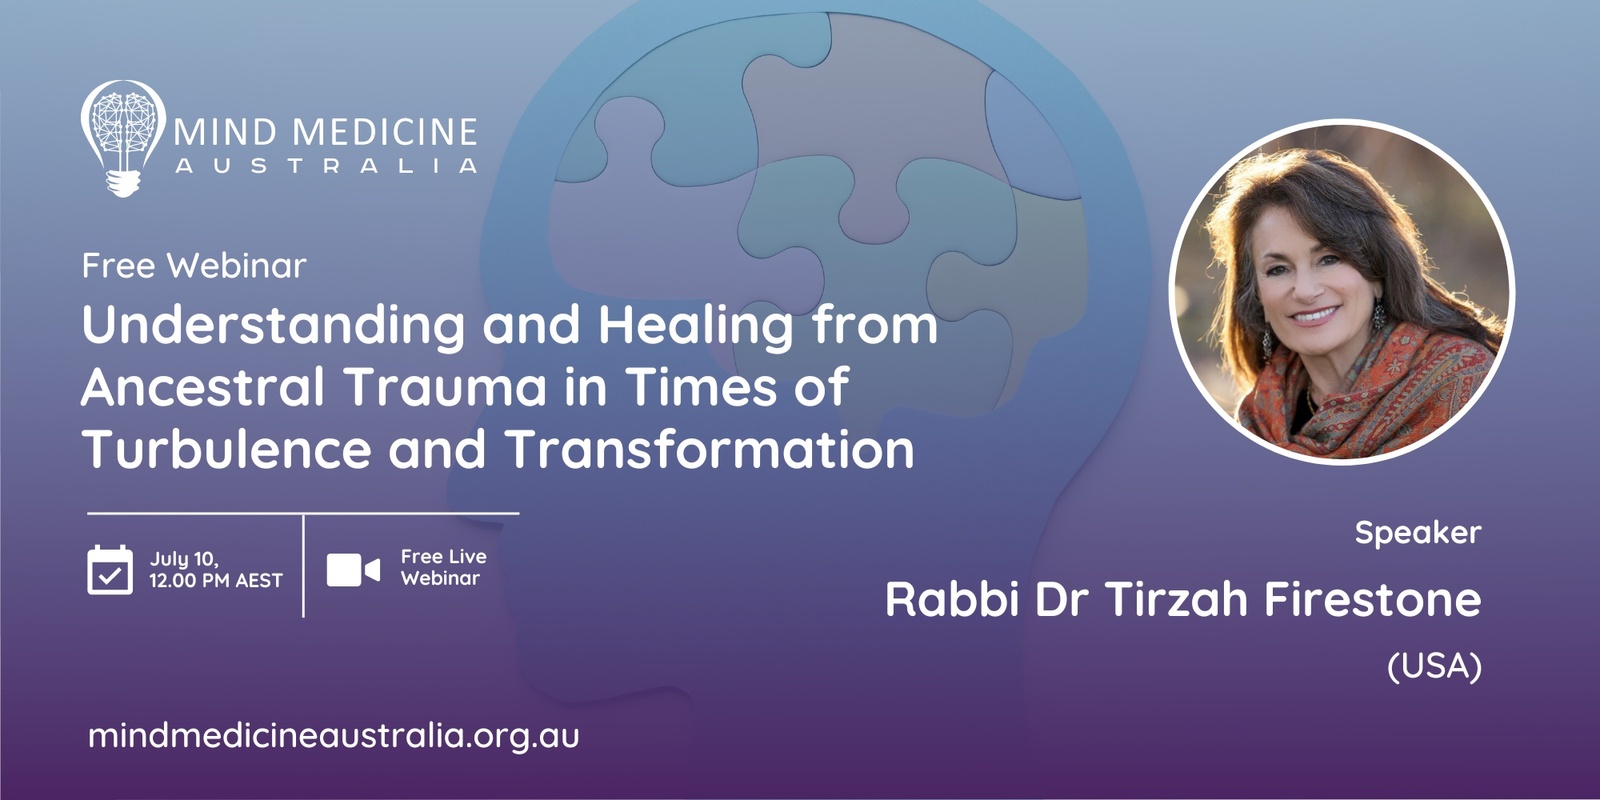 Banner image for Mind Medicine Australia FREE Webinar - Understanding and Healing from Ancestral Trauma in Times of Turbulence and Transformation with Rabbi Dr Tirzah Firestone (USA)